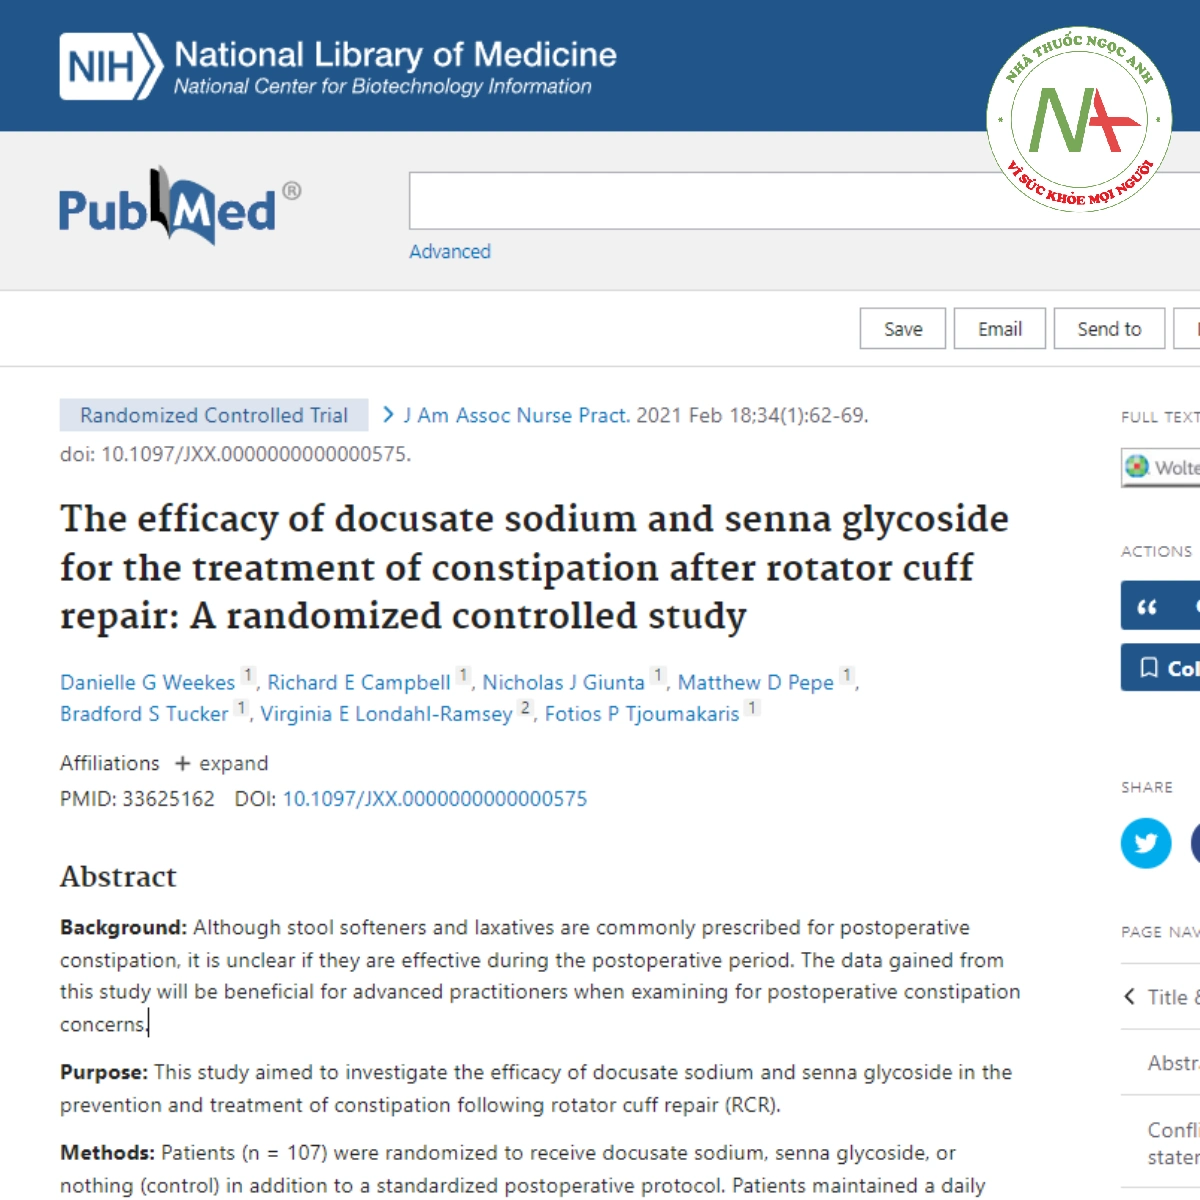 The efficacy of docusate sodium and senna glycoside for the treatment of constipation after rotator cuff repair_ A randomized controlled study